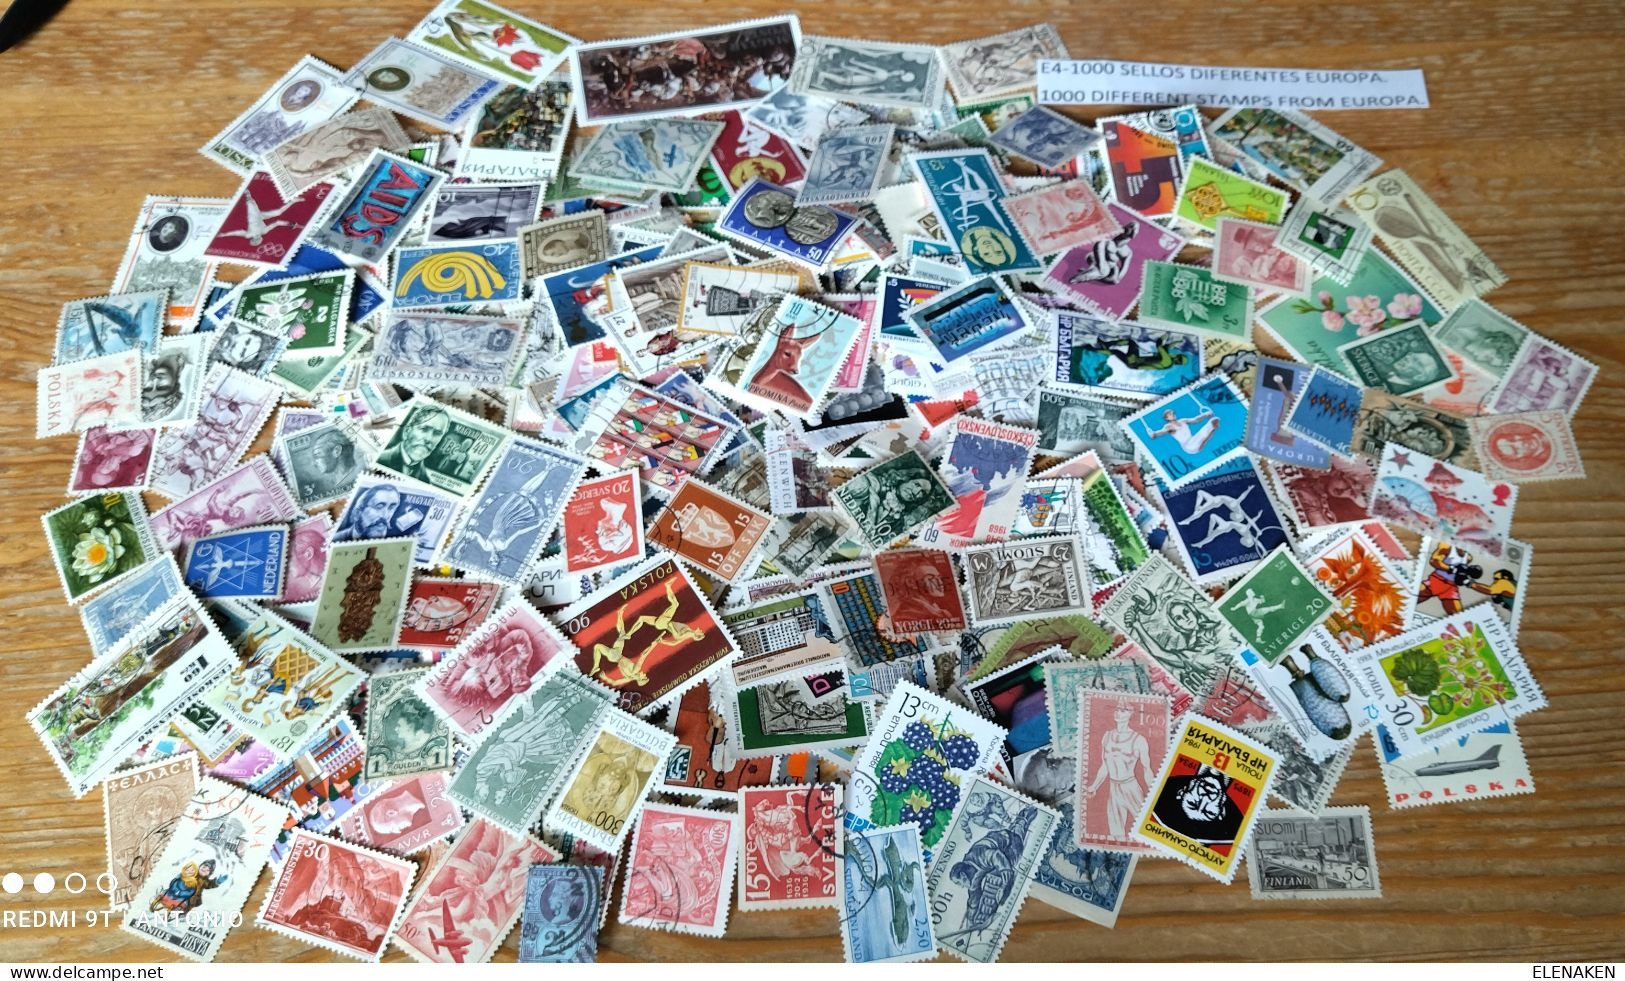 E4-1000 SELLOS DIFERENTES PAÍSES DE EUROPA  1000 STAMPS DIFFERENT COUNTRIES OF EUROPE - Vrac (min 1000 Timbres)